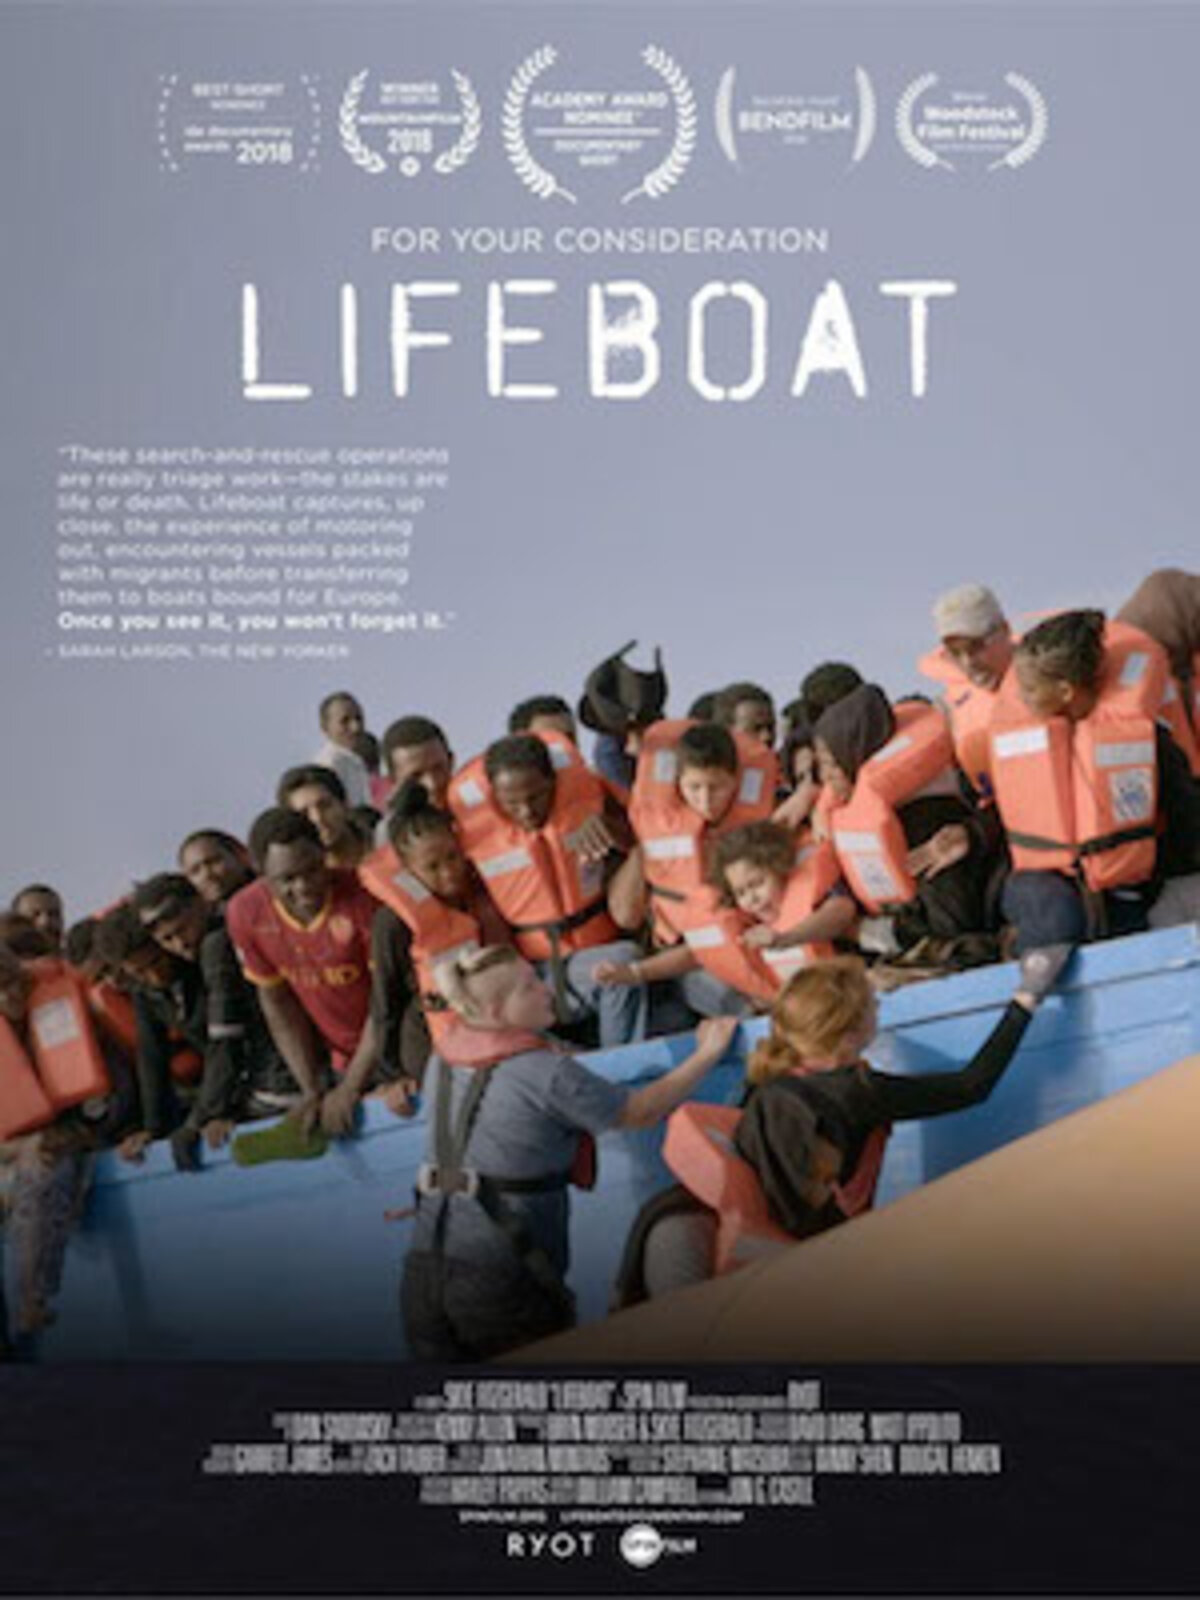 a movie poster for Lifeboat of a group of refugees wearing life jackets on a boat. 